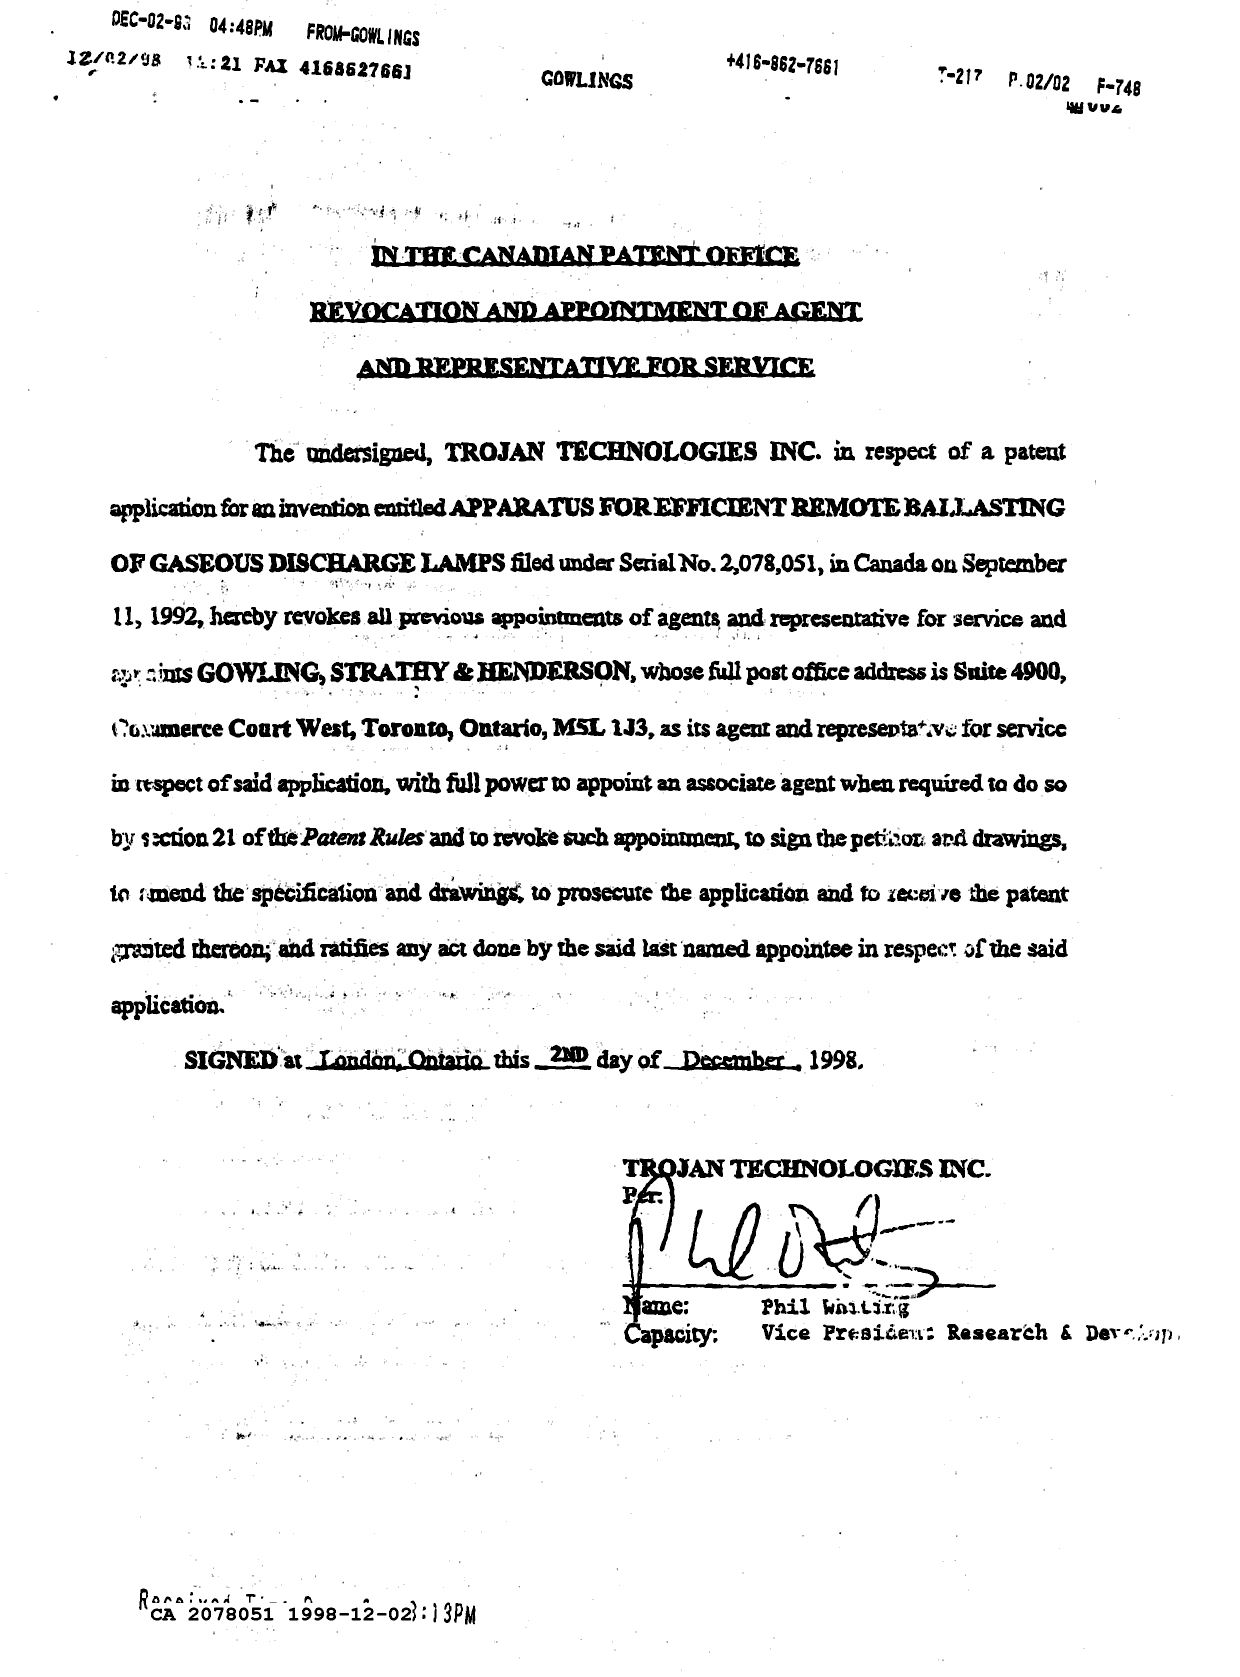 Canadian Patent Document 2078051. PCT Correspondence 19981202. Image 1 of 1